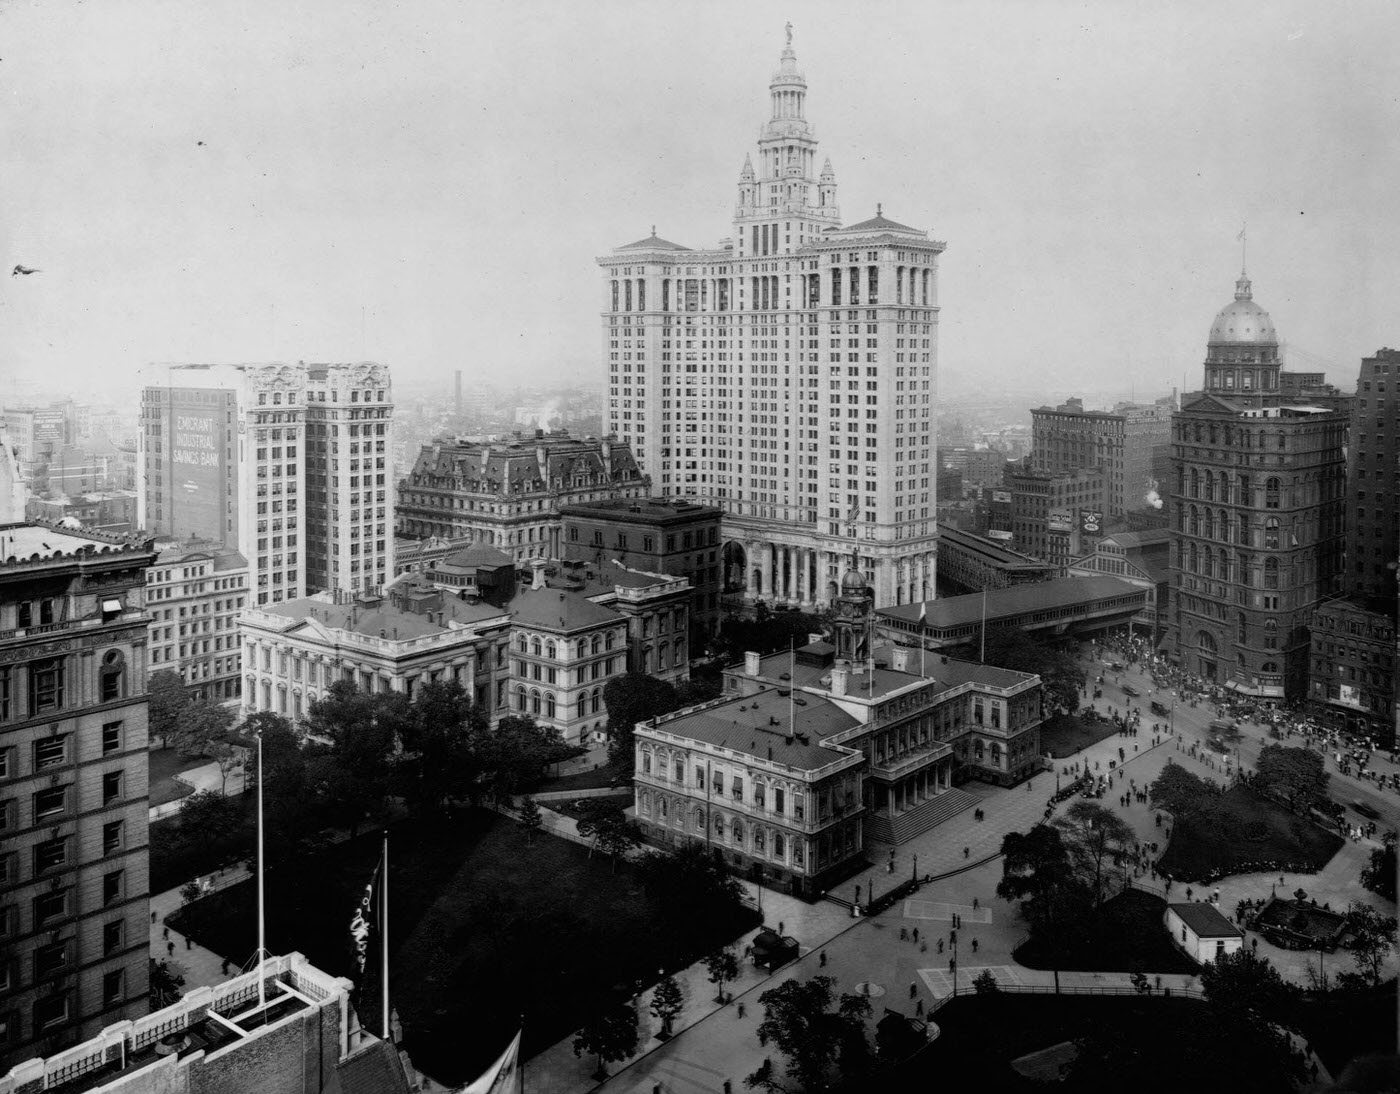 City Hall Park And Surrounding Buildings, New York City, August 28, 1915